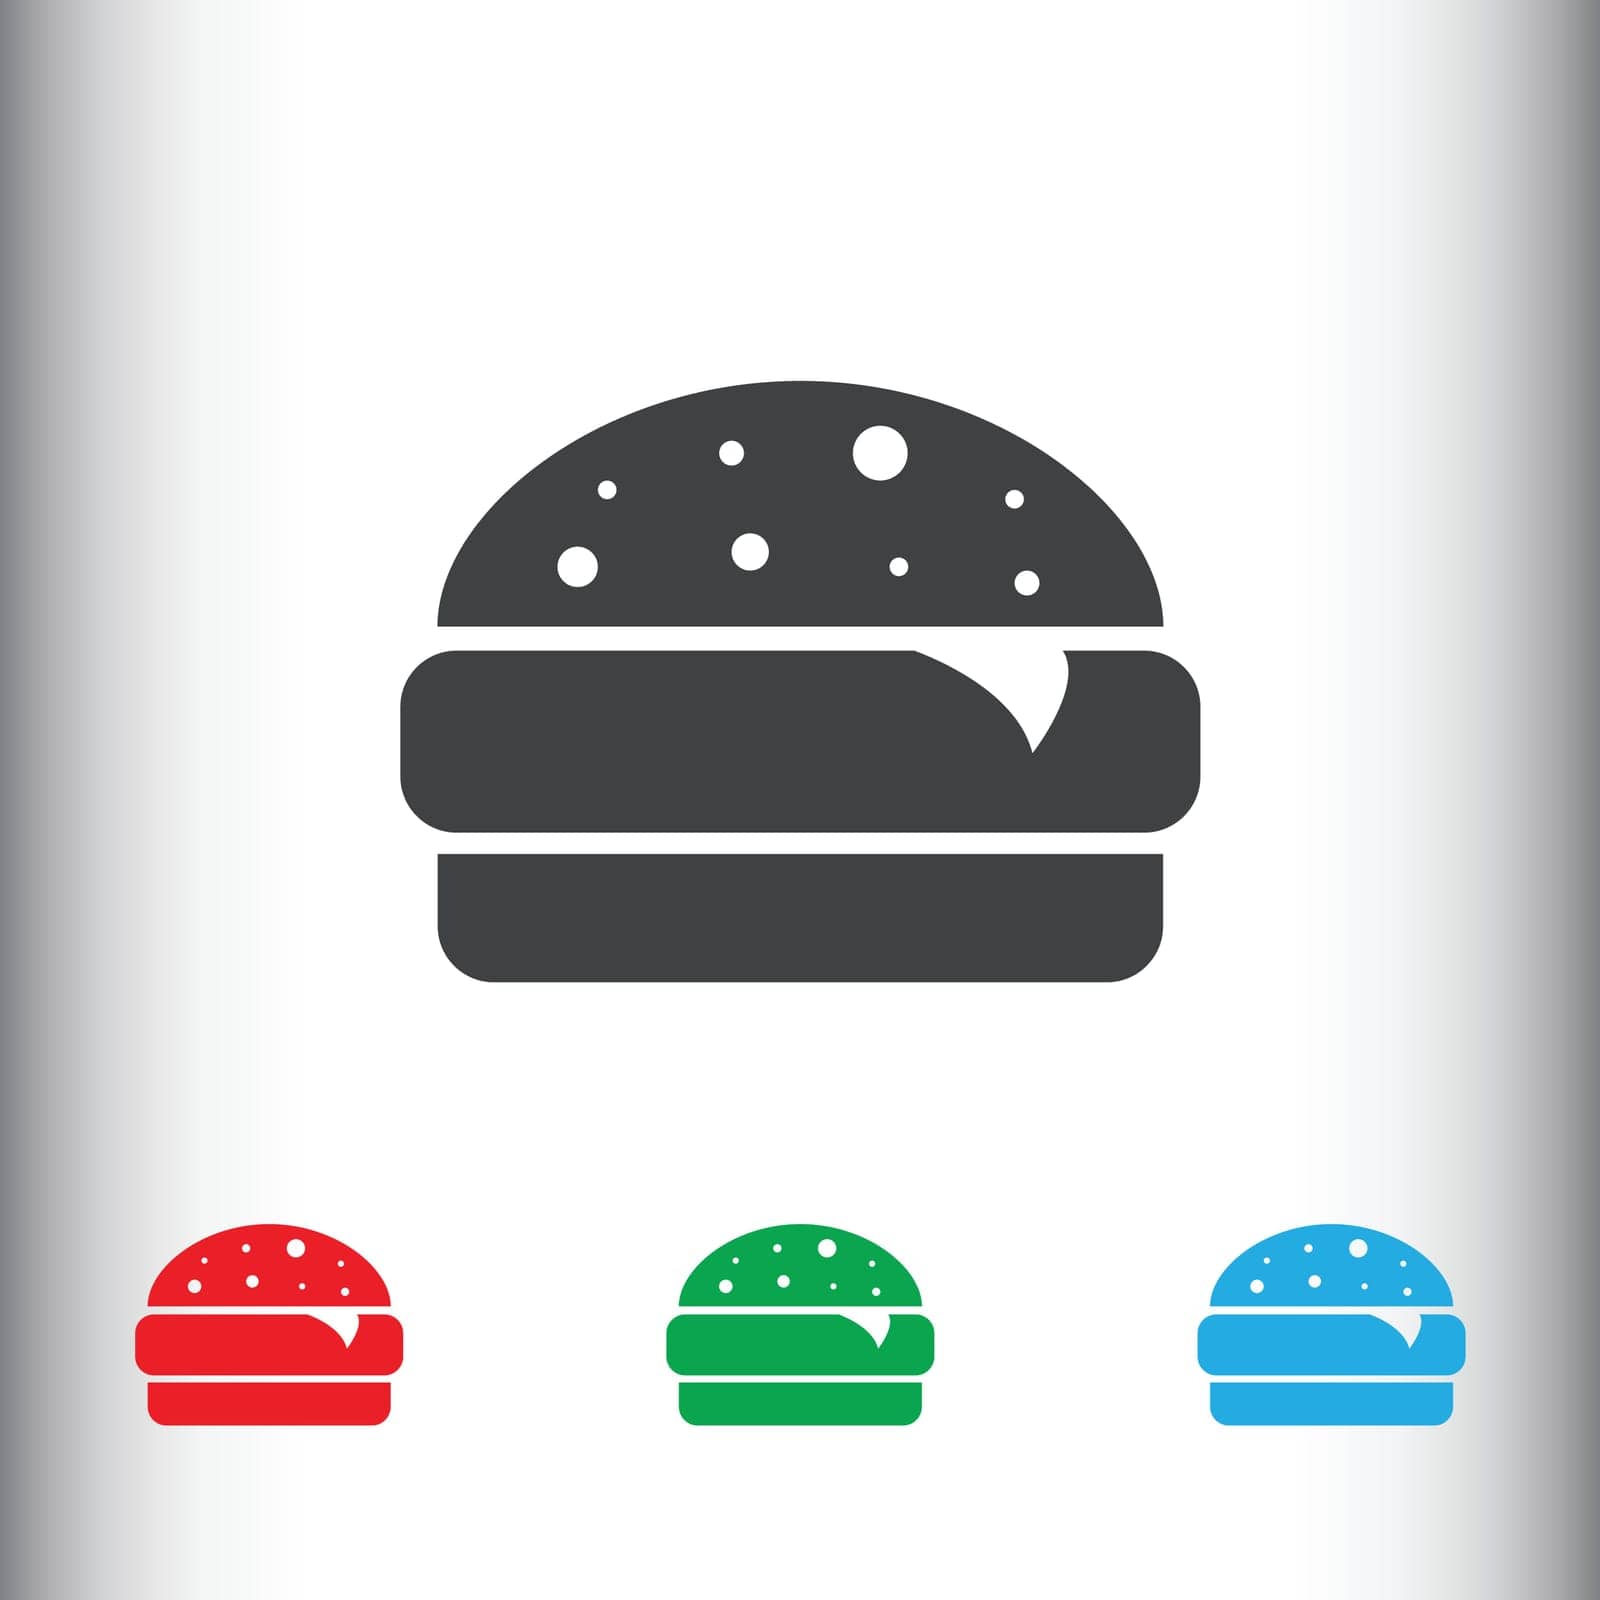 burger icon, sign icon, vector illustration. burger symbol. flat icon. flat design style for web and mobile.